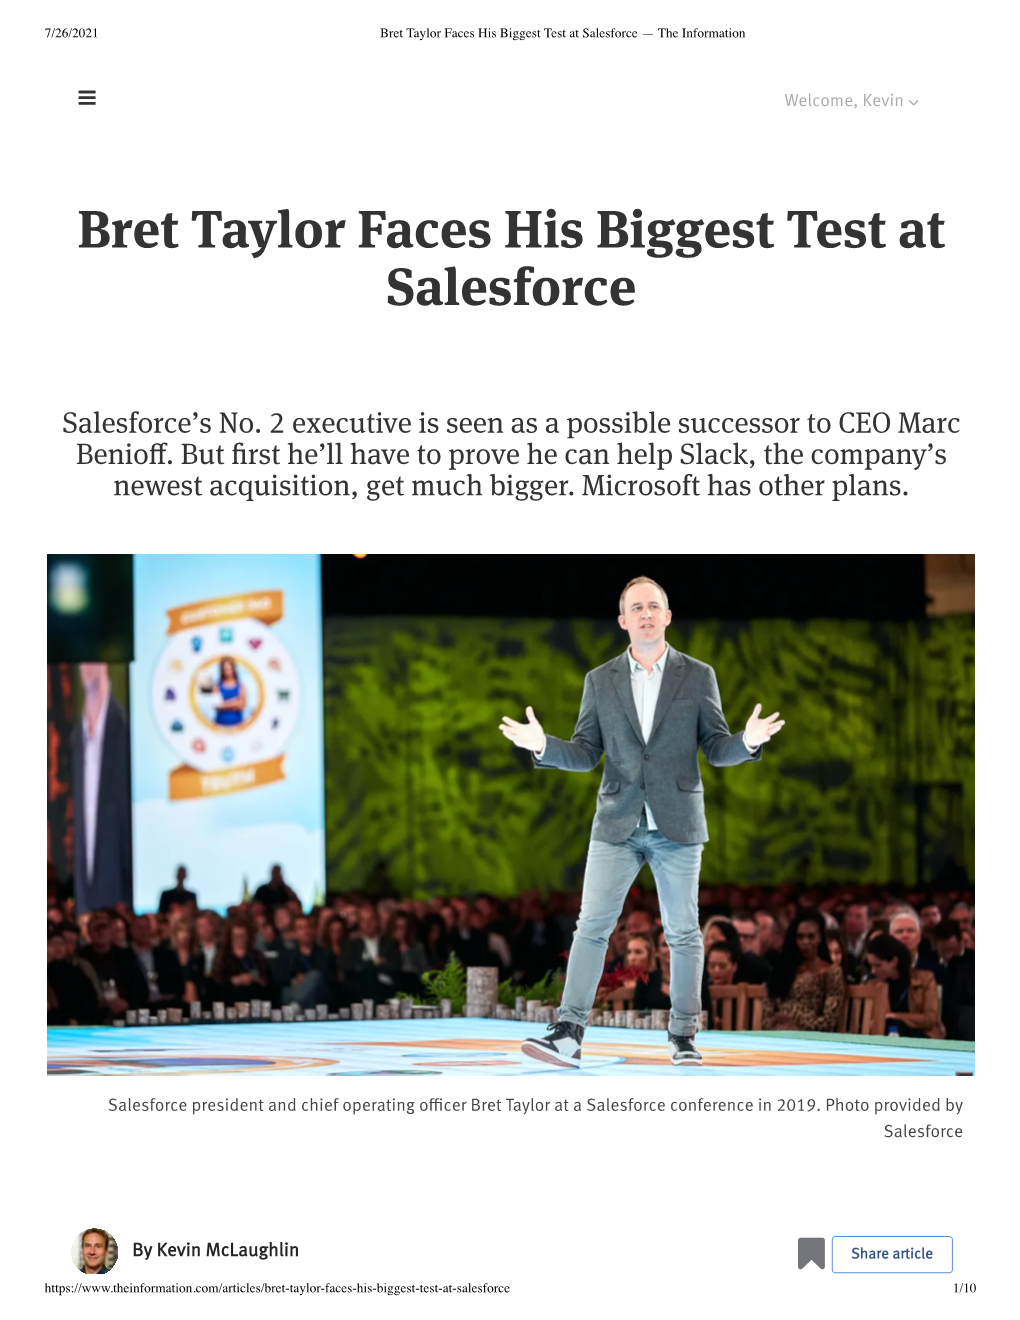 Bret Taylor Faces His Biggest Test at Salesforce — the Information